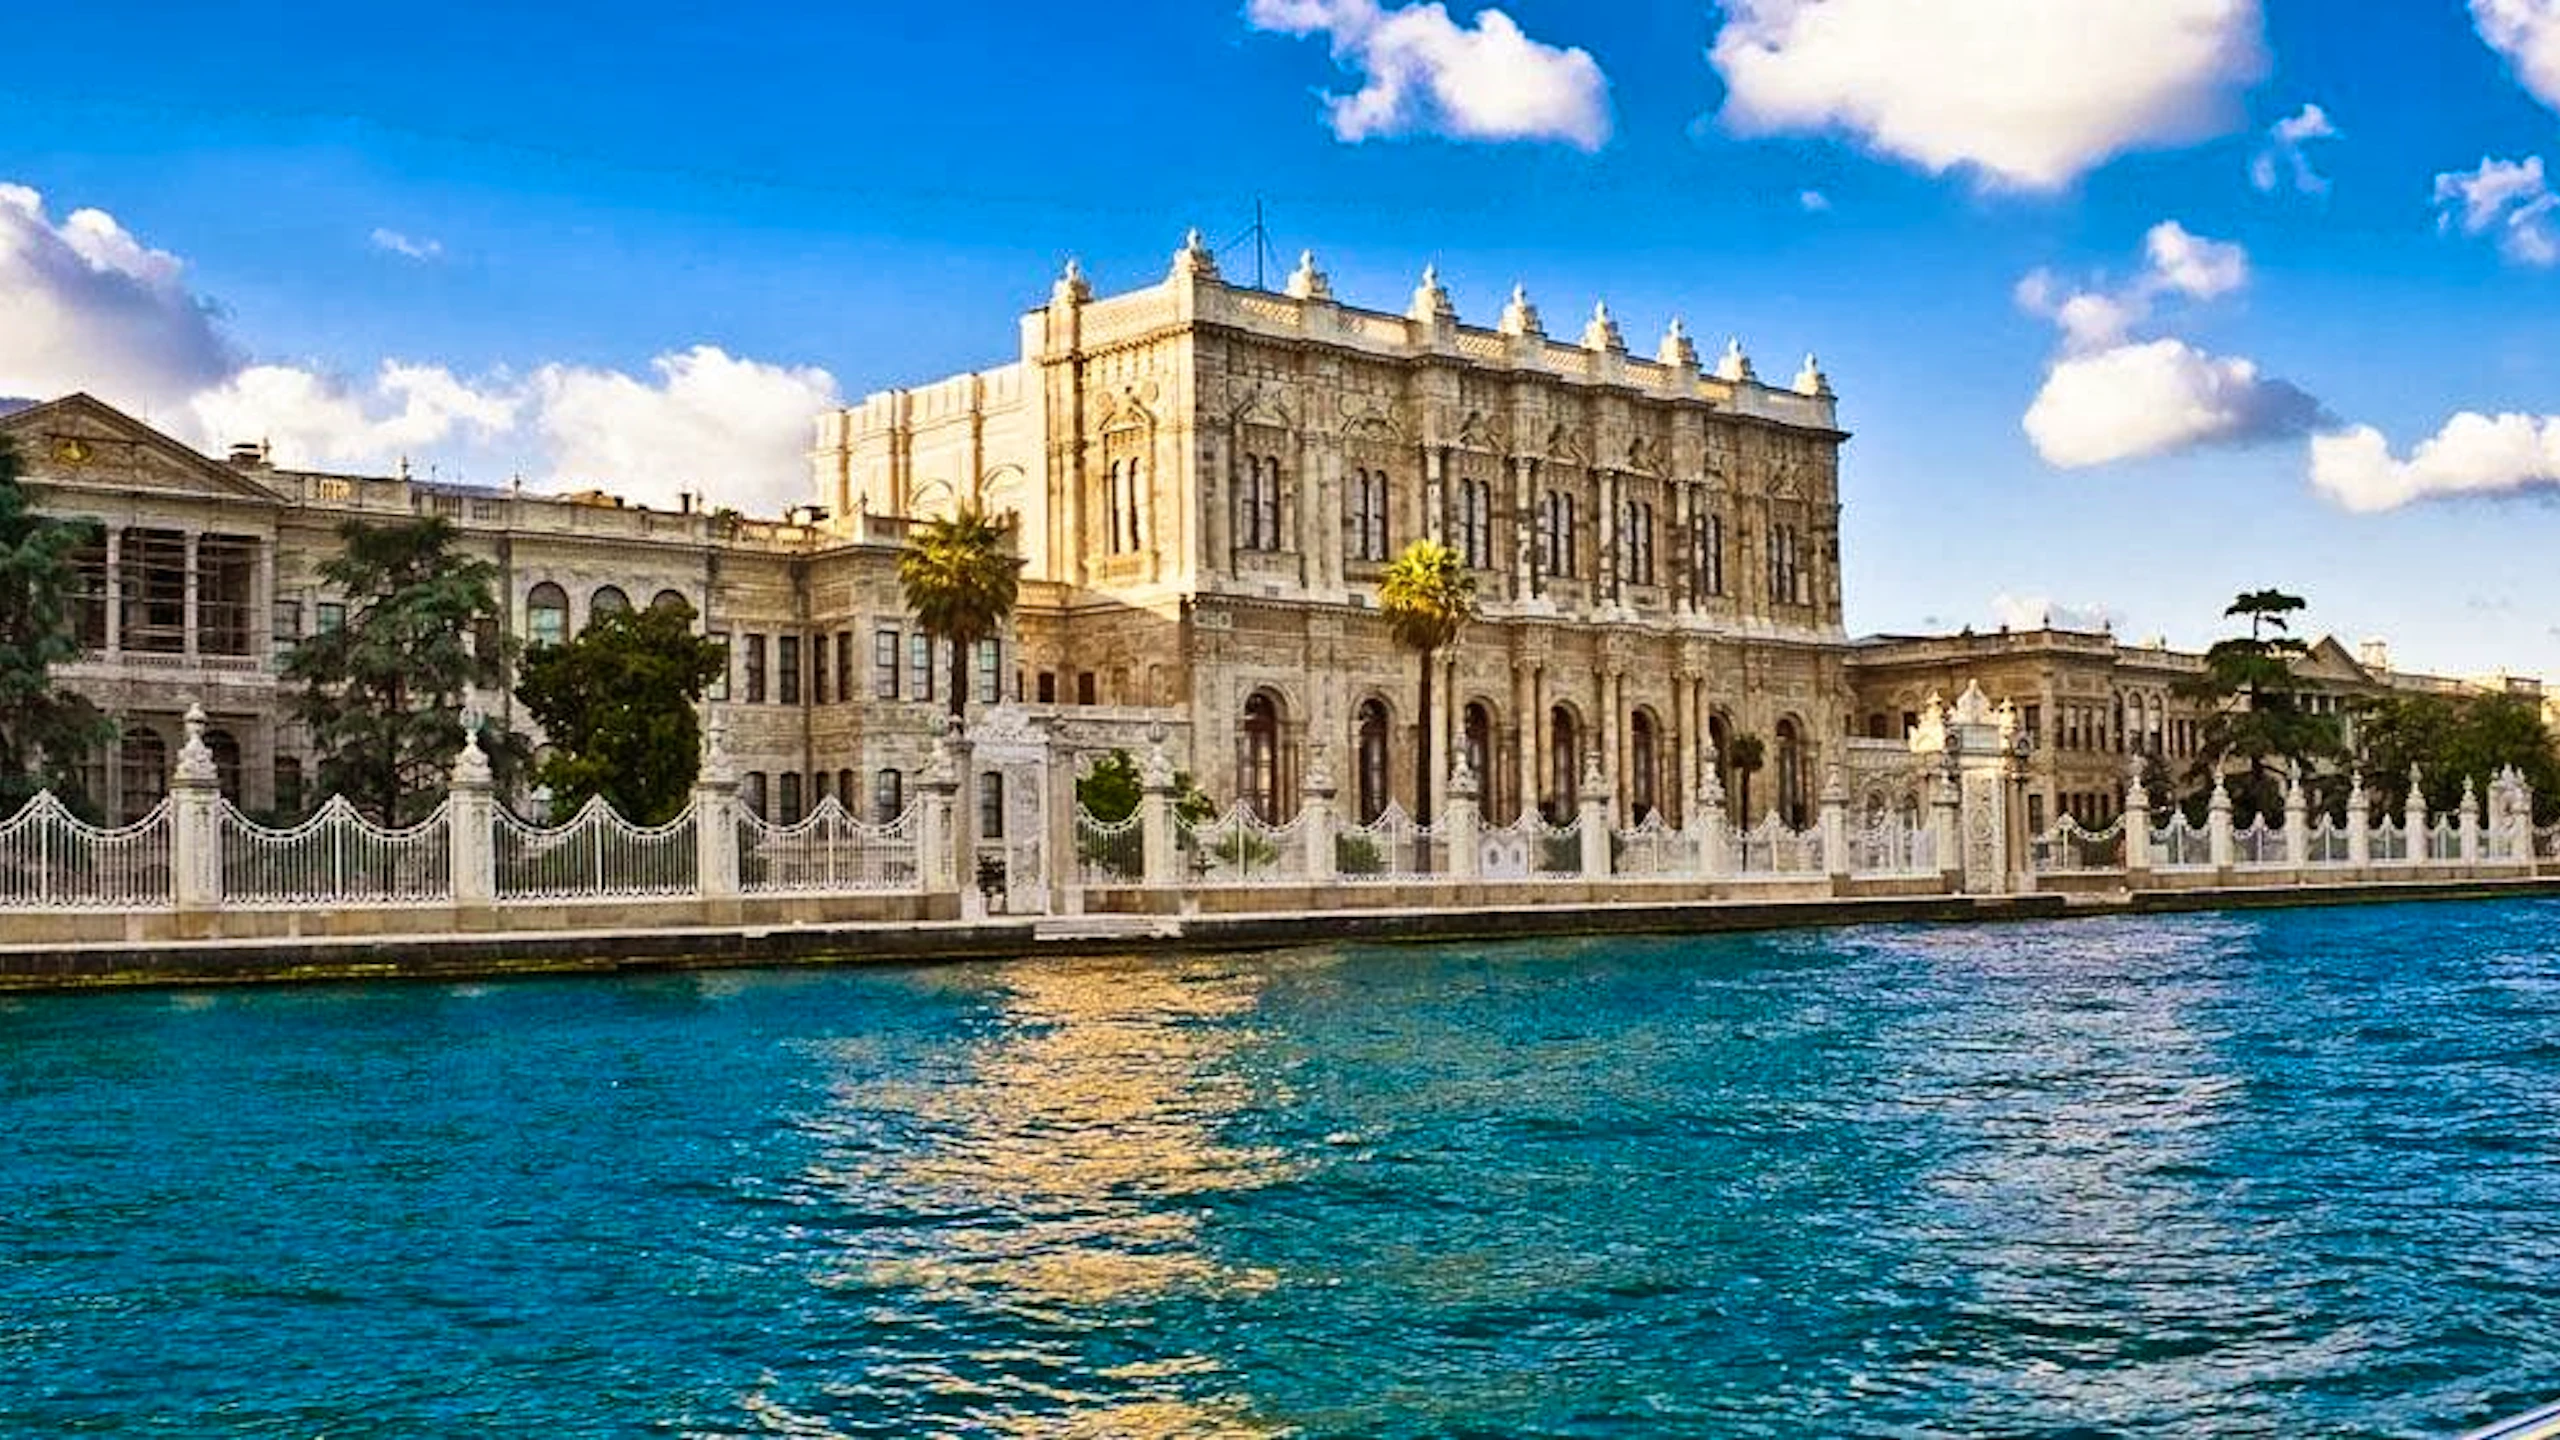 Bosphorus Cruise with Asian Side & Dolmabahce Palace Ticket